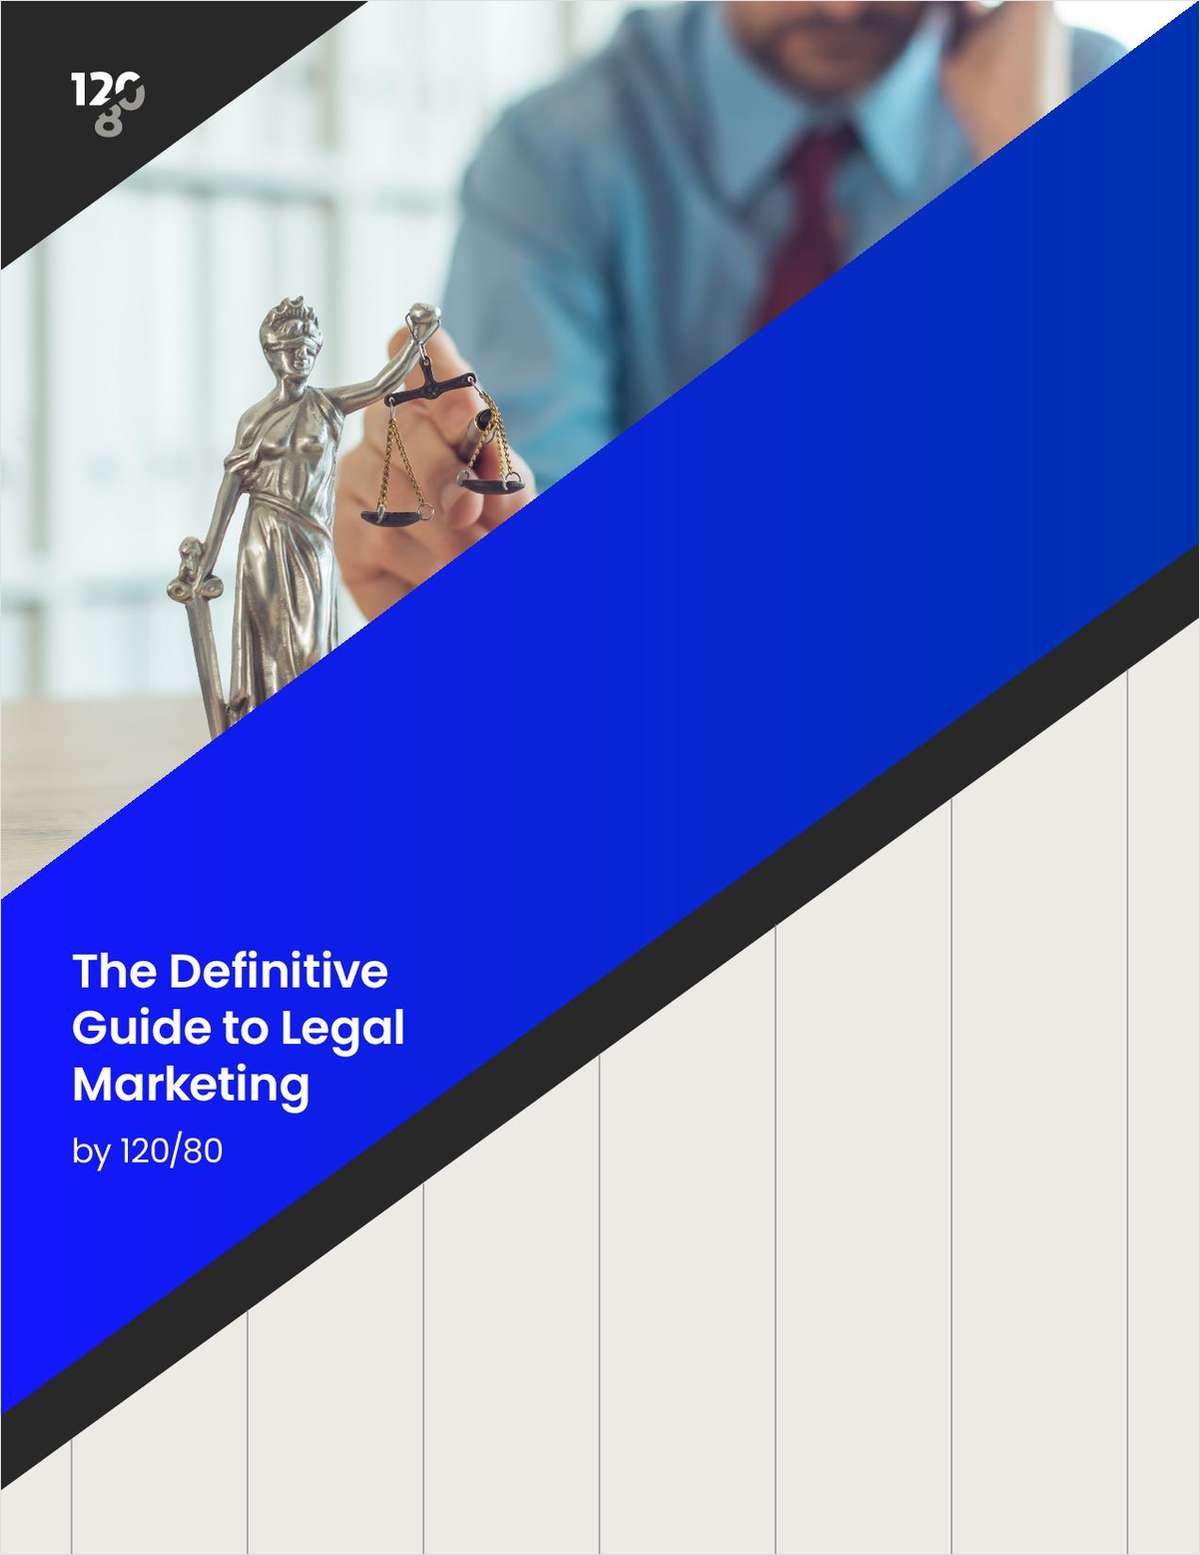 The Definitive Guide to Legal Marketing